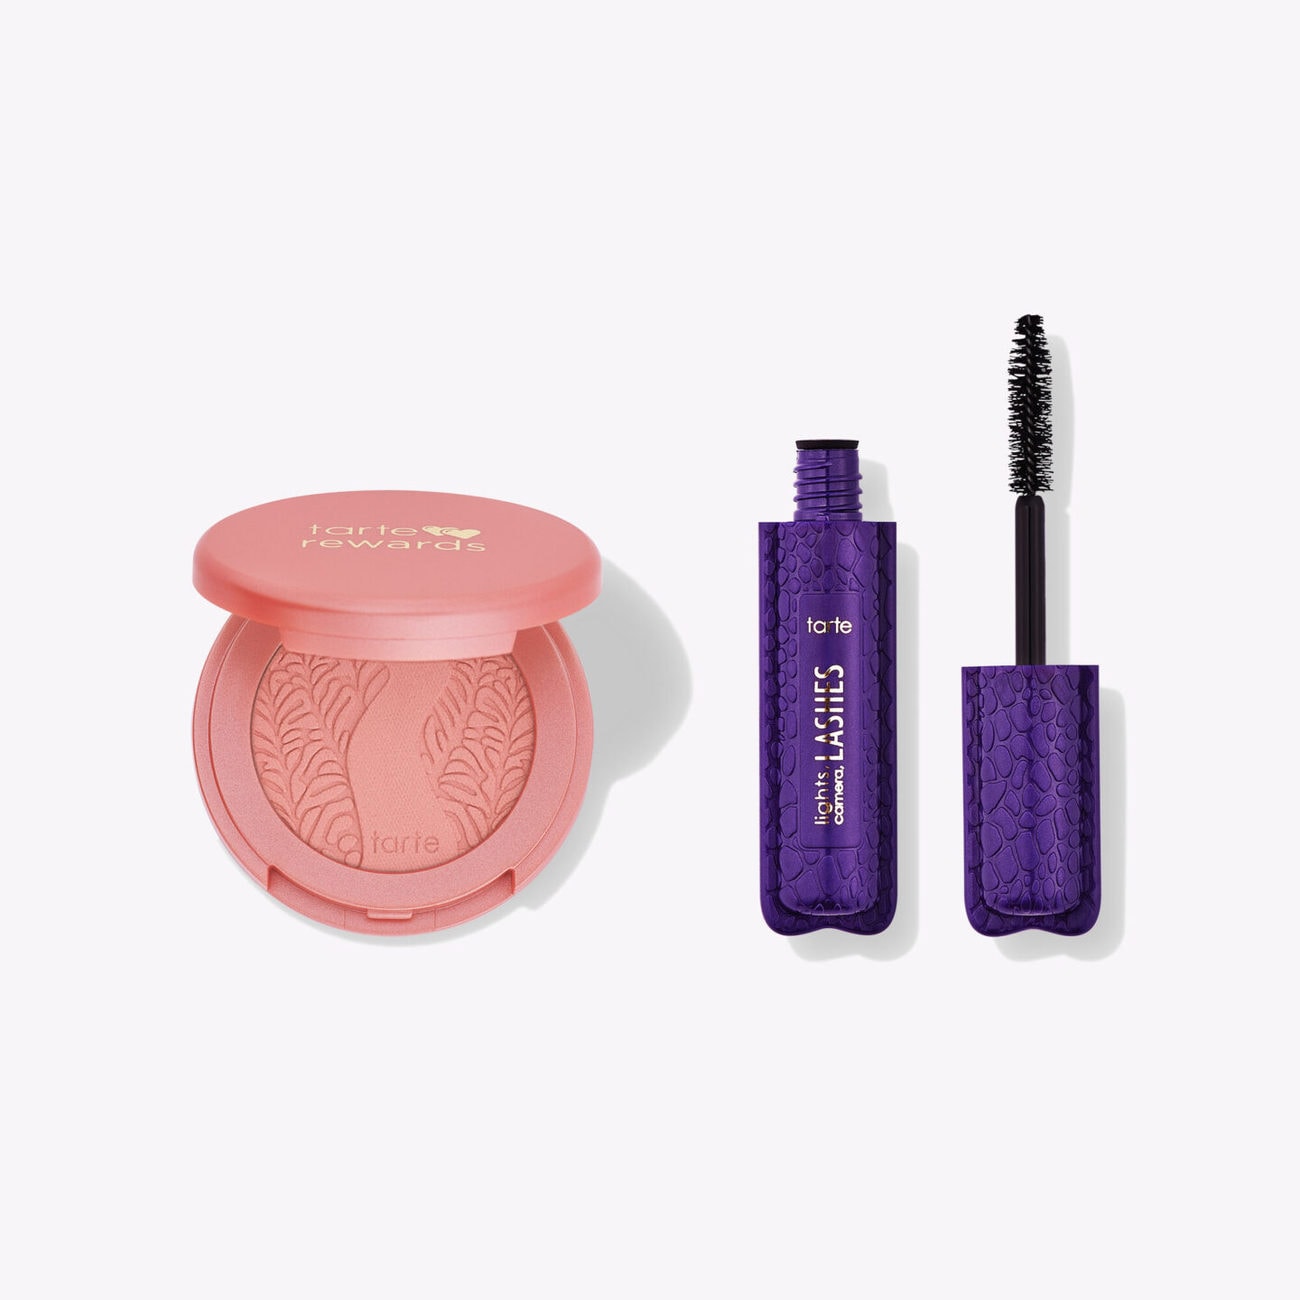 Tarte Cosmetics Birthday Gift for Tarte Rewards Members - Amazonian clay 12-hr blush and Lights, camera, lashes 4-in-1 mascara